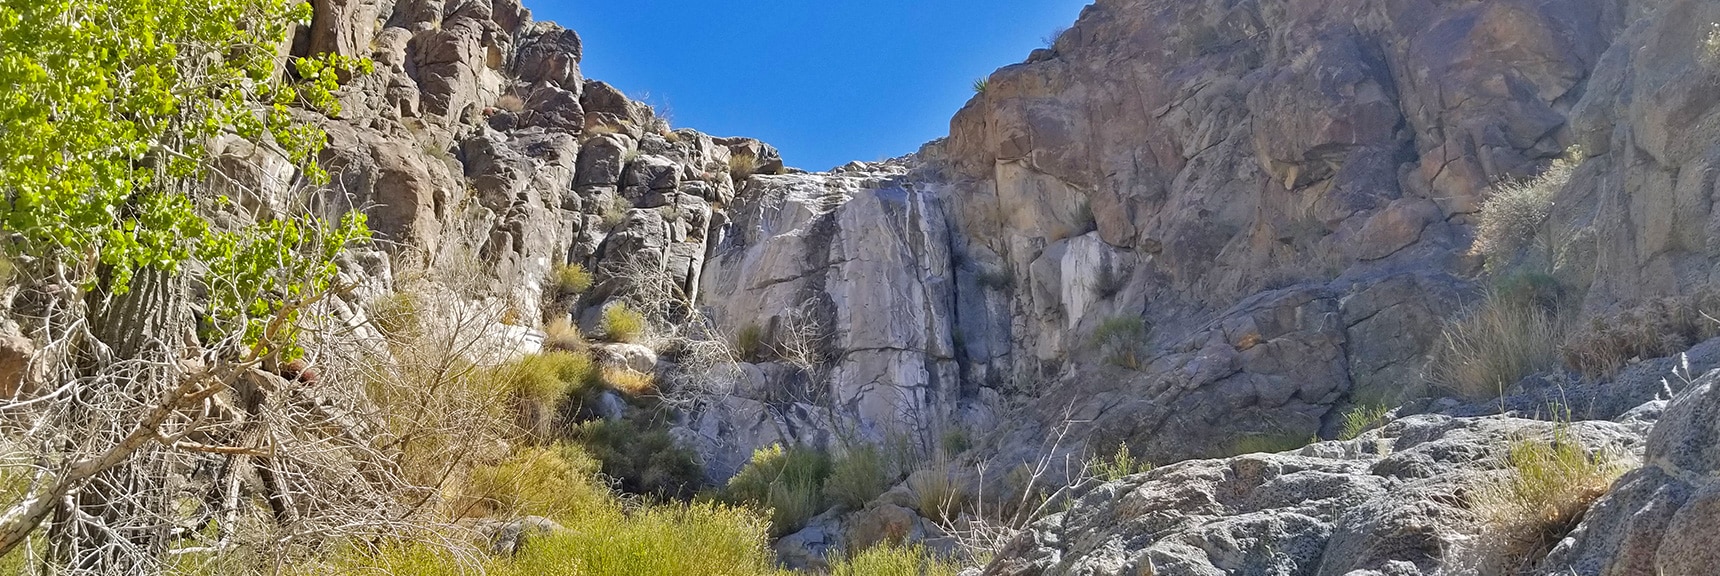 Barrier Dry Waterfall in Upper Horse Thief Canyon. Navigate Via Left Ridge. | Horse Thief Canyon Loop | Mt. Wilson | Black Mountains | Lake Mead National Recreation Area, Arizona